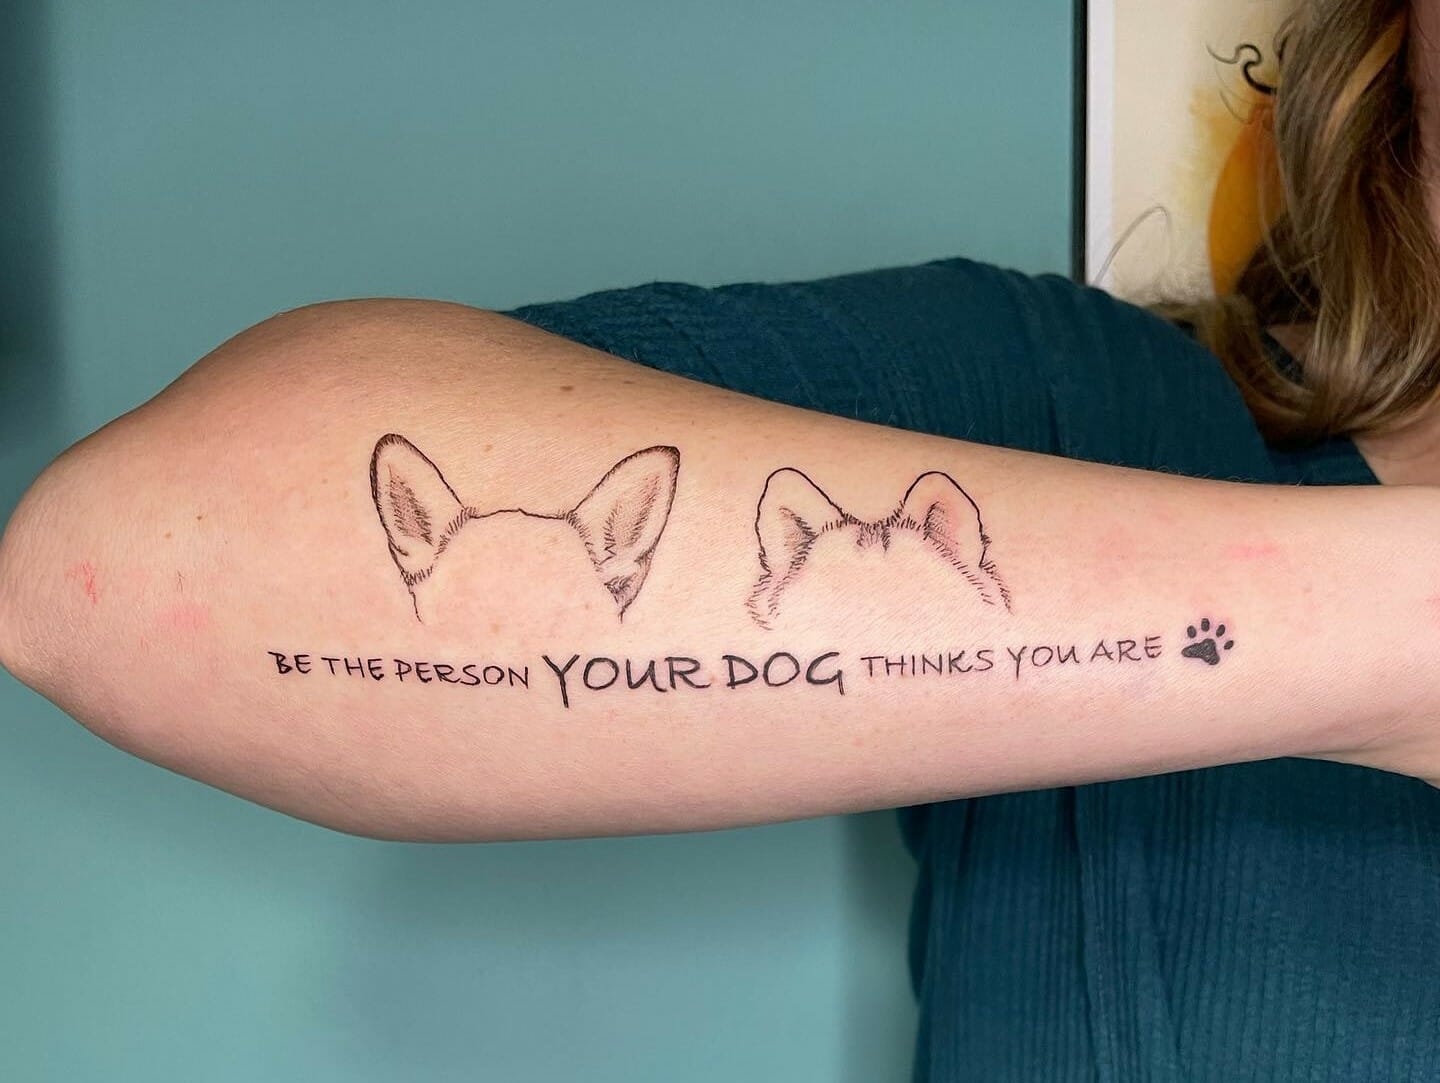 2. "Small and Simple Dog Ear Tattoos" - wide 1